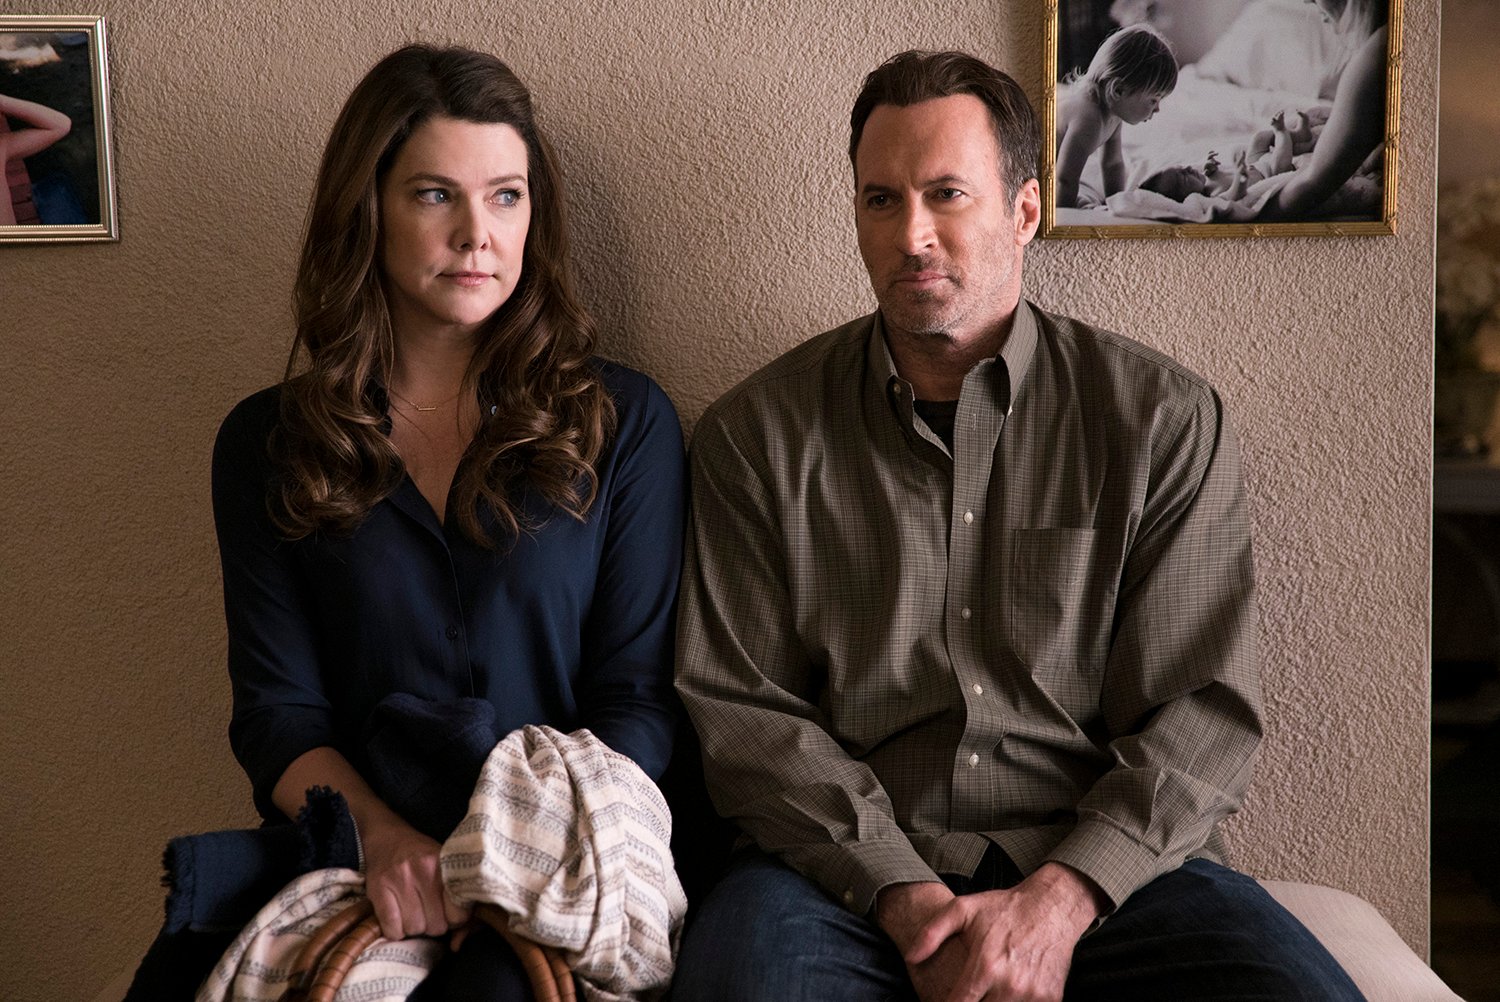 Lauren Graham as Lorelai Gilmore and Scott Patterson as Luke Danes looking uncomfortable in a cringe-worthy Gilmore Girls: A Year in the Life scene